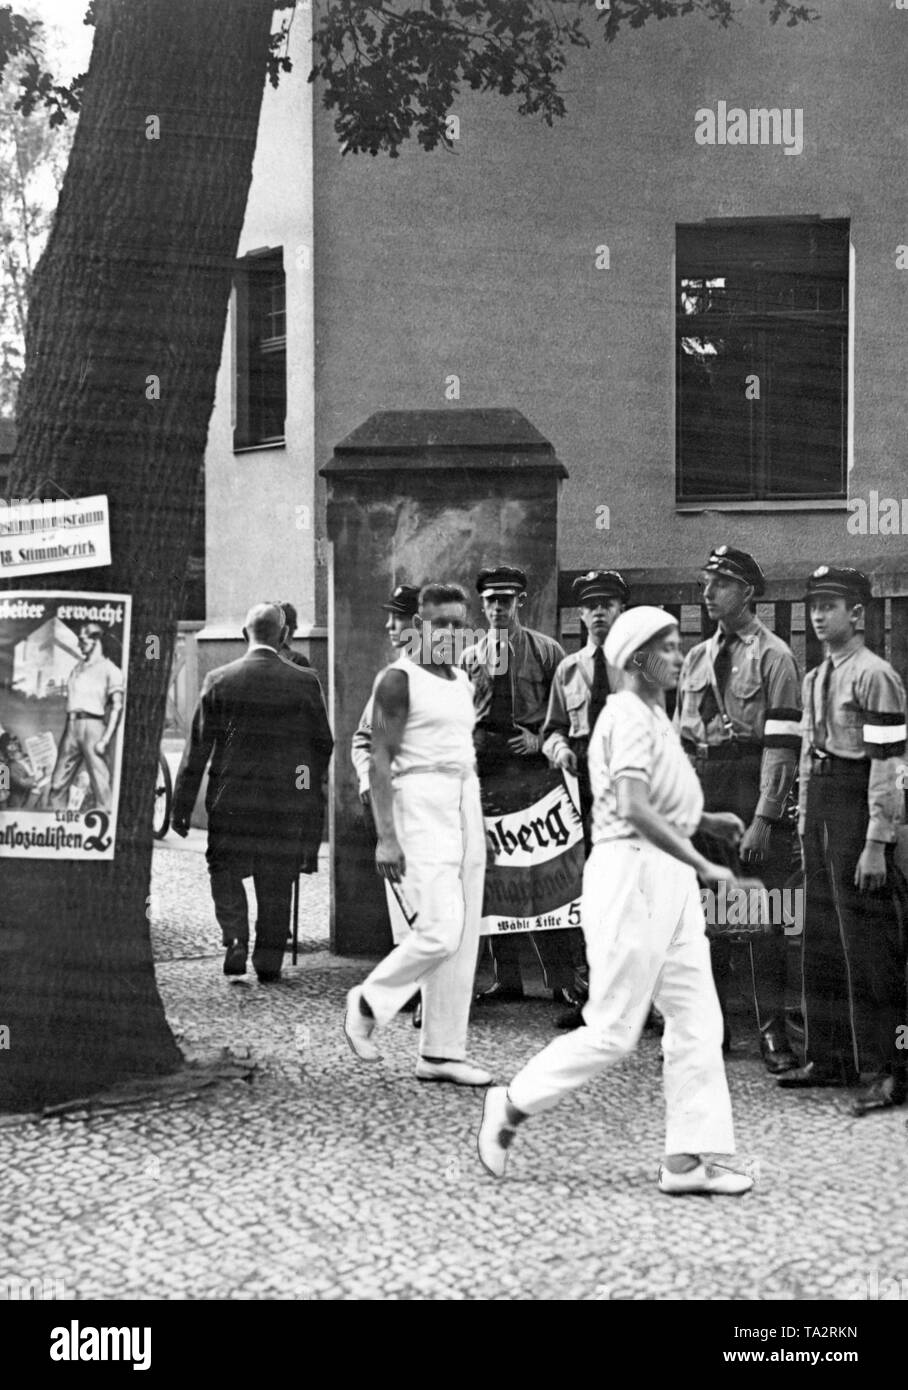 Water sportsmen on their way to the polling station in Mirbachstrasse in Potsdam on the occasion of the Reichstag election. On a tree, left in the foreground there is an election poster of the NSDAP with the call 'Workers wake up'. On the right in the background there are the supporters of the Kampffront Schwarz-Weiss-Rot with an election poster of the German National People's Party, which campaigns for Hugenberg. Stock Photo